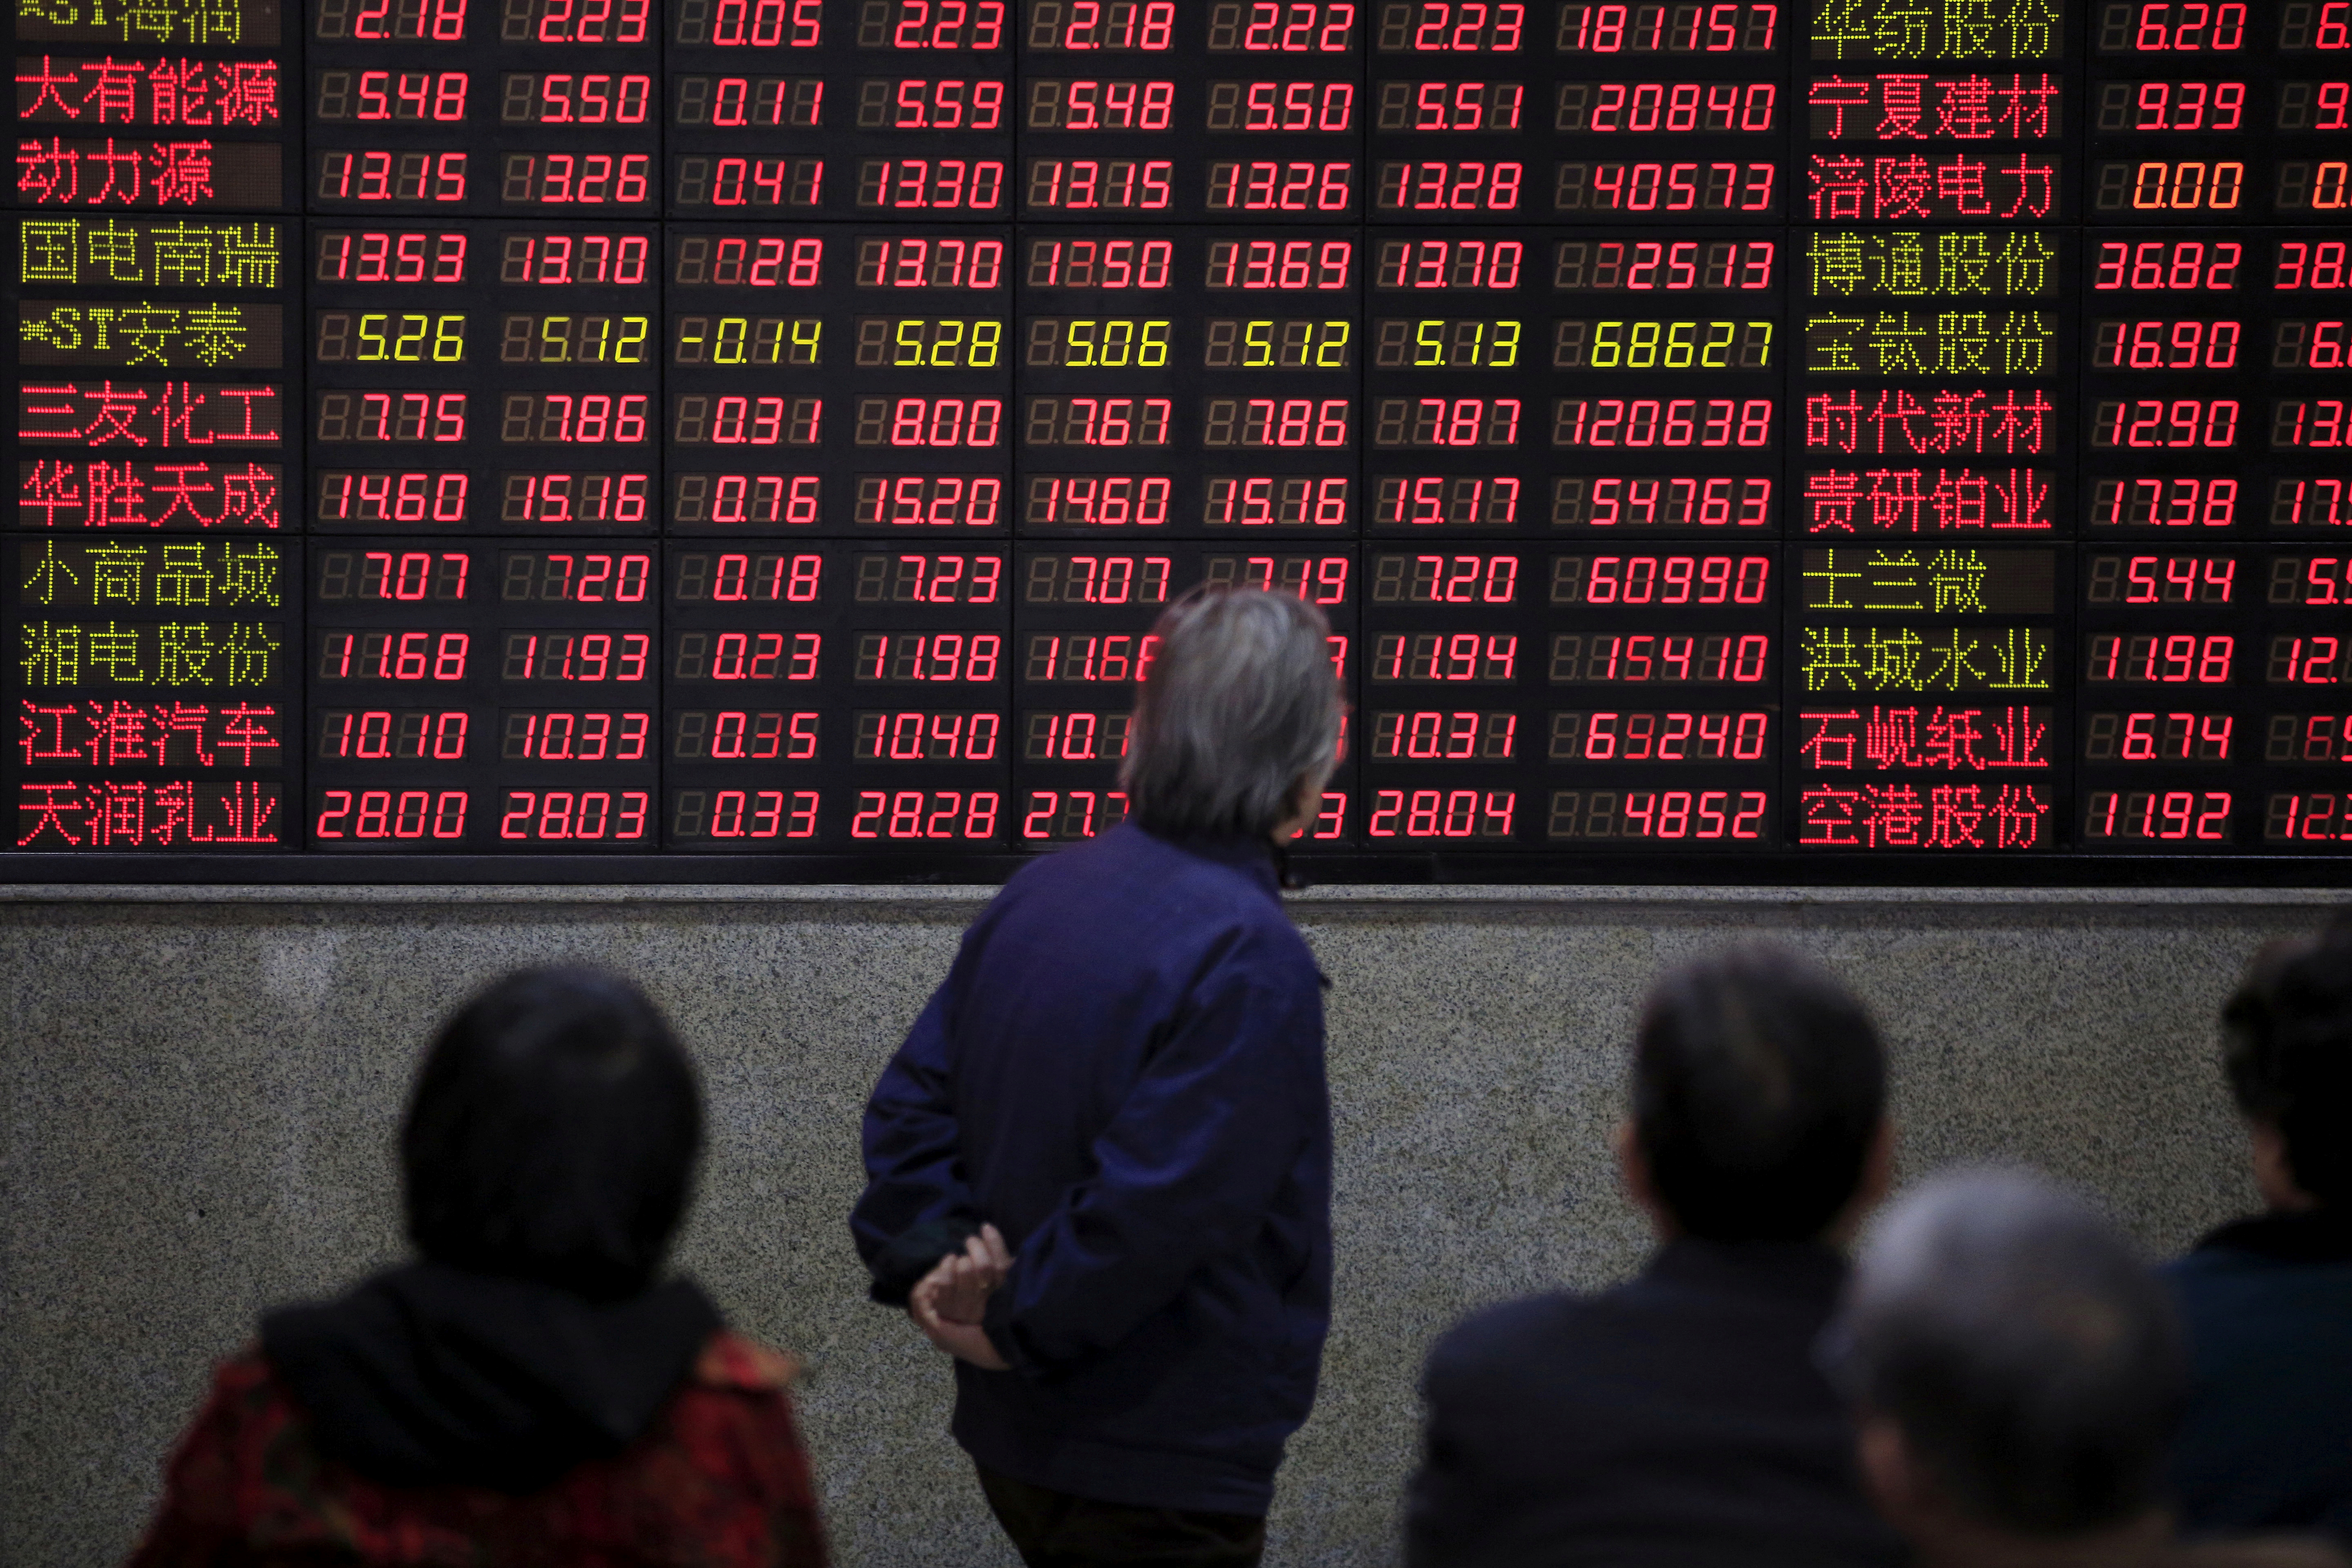 Investors look at an electronic board showing stock information at a brokerage house in Shanghai